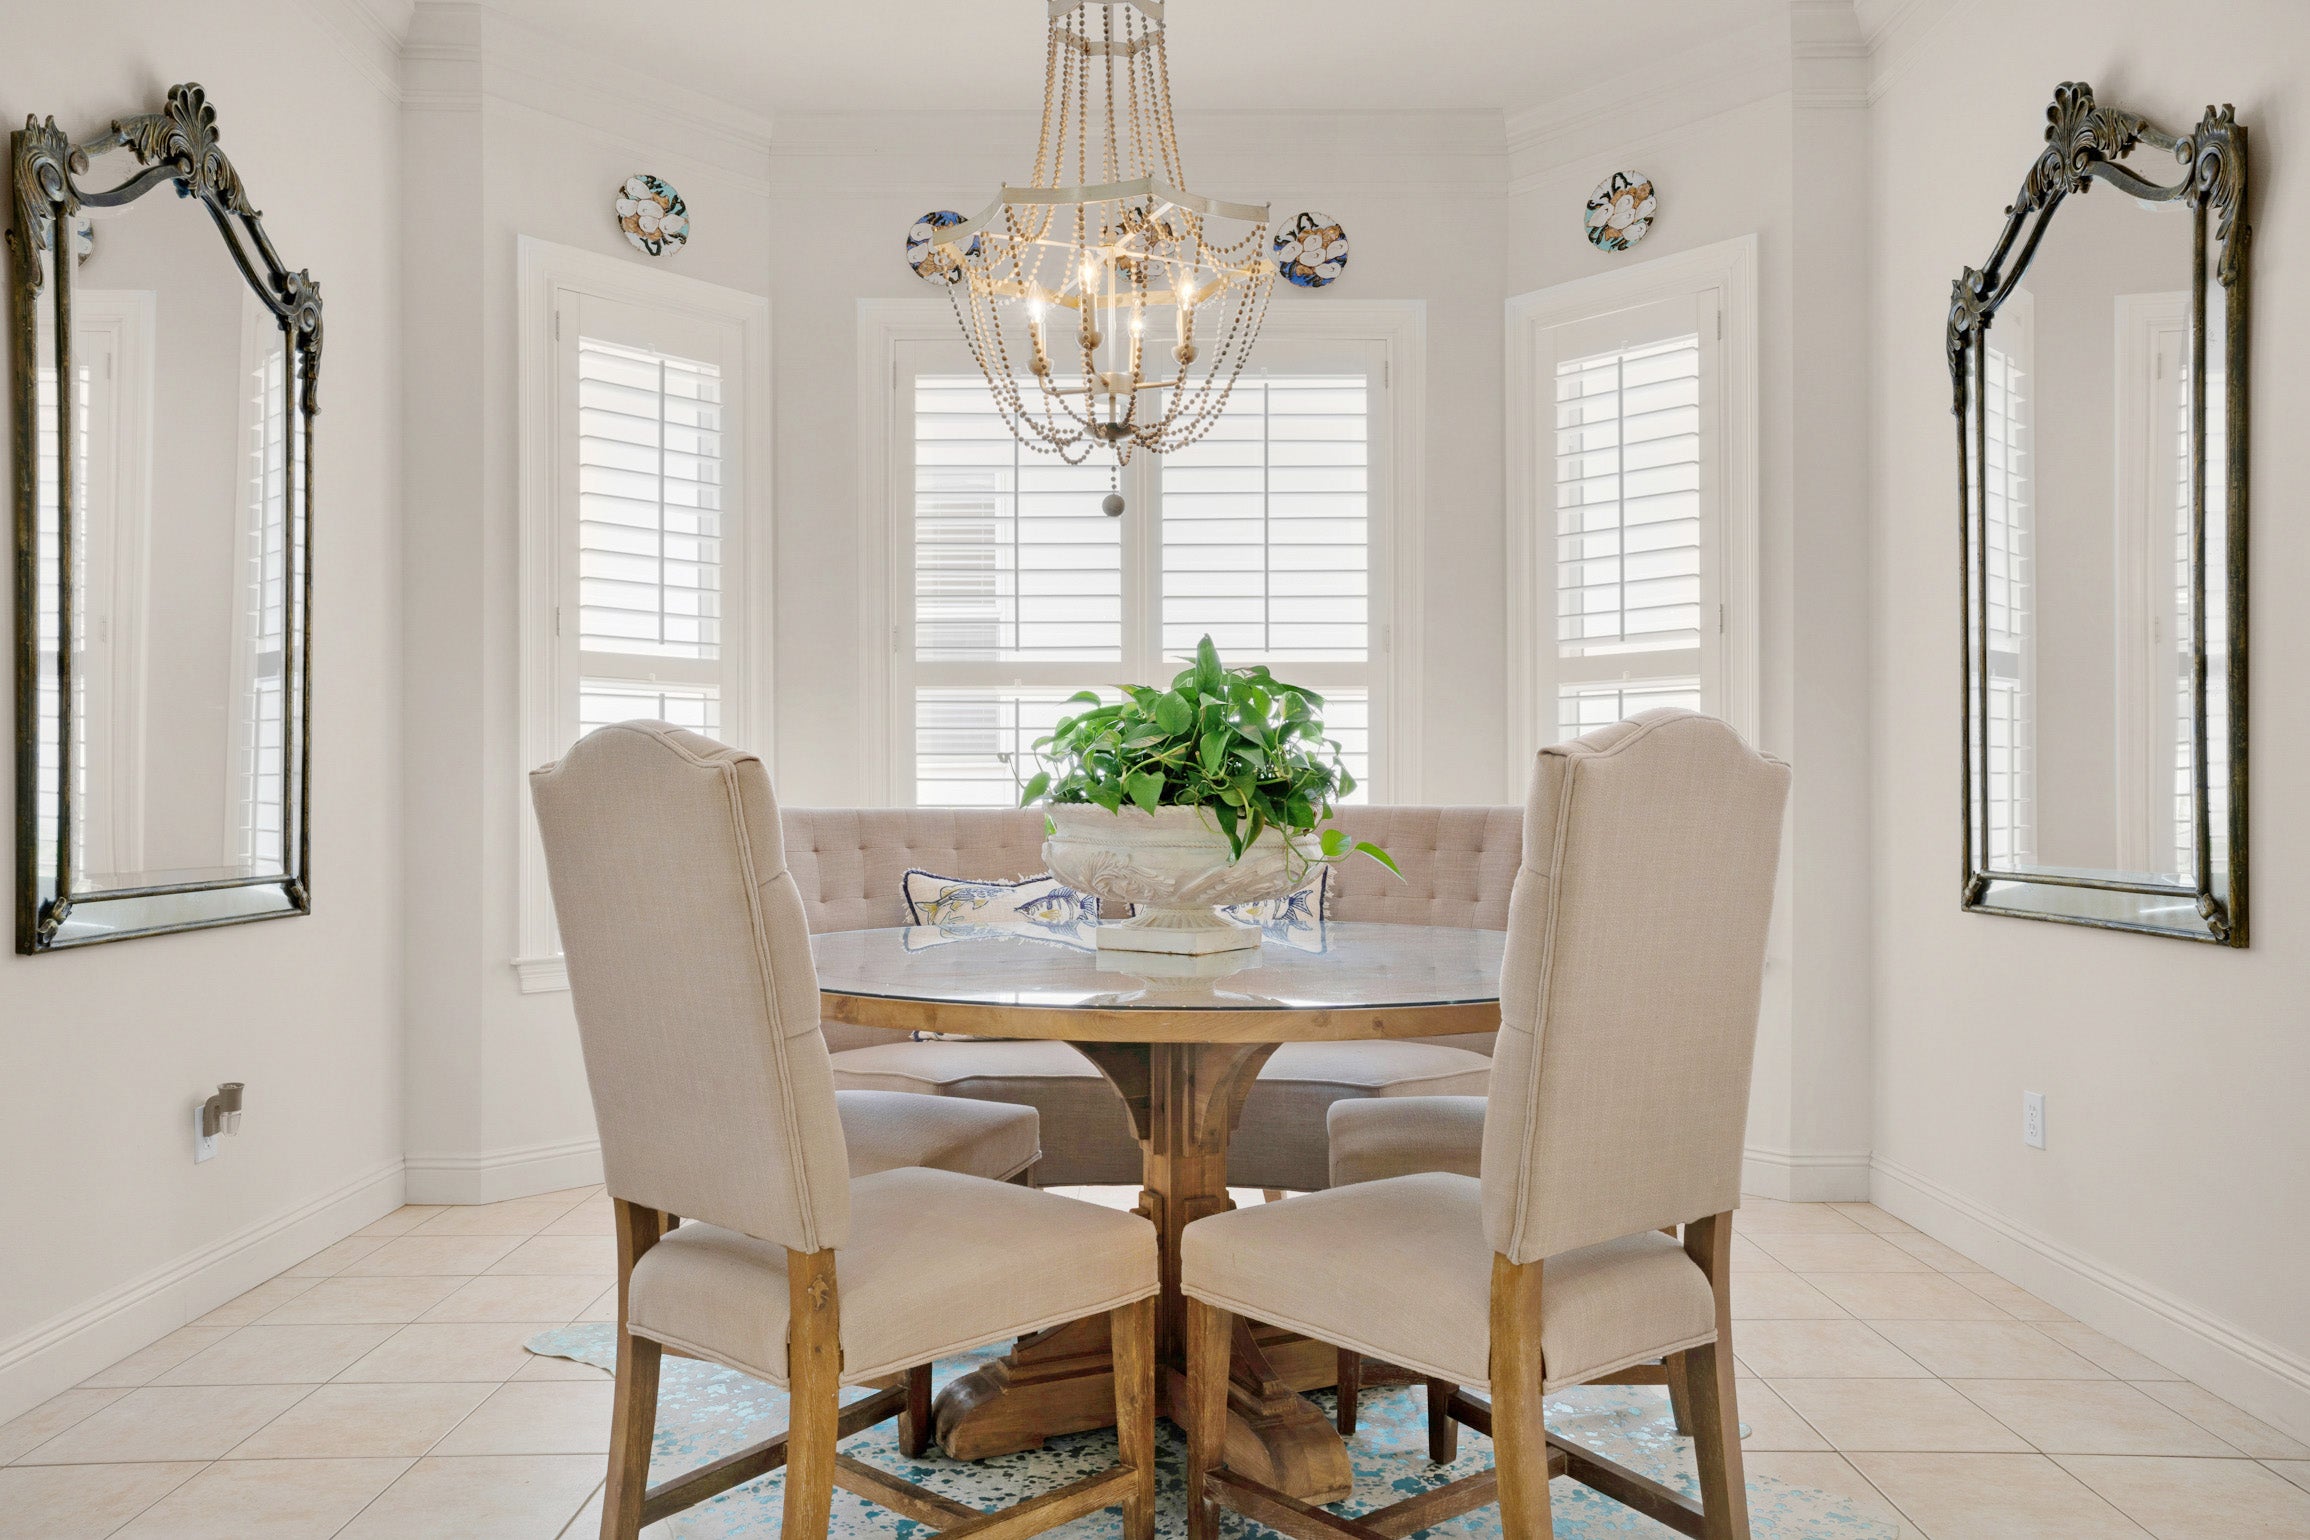 Dining table seats 4